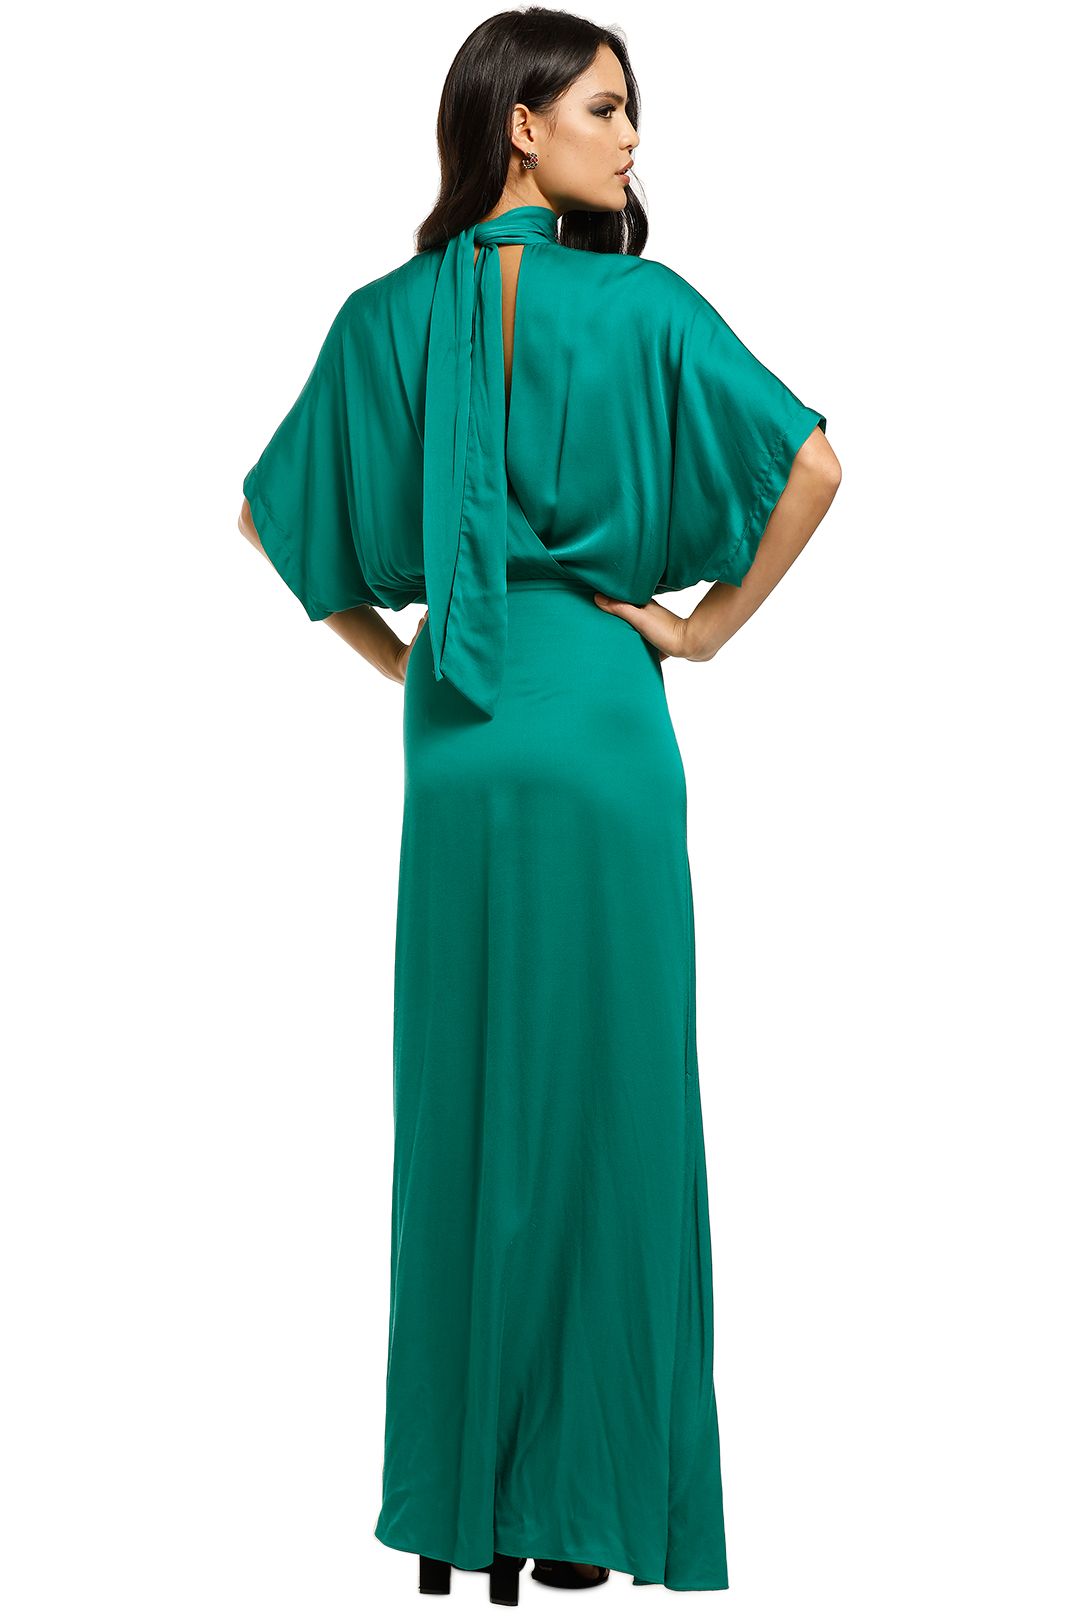 Ginger-and-Smart-Bliss-Gown-Jade-Green-Back